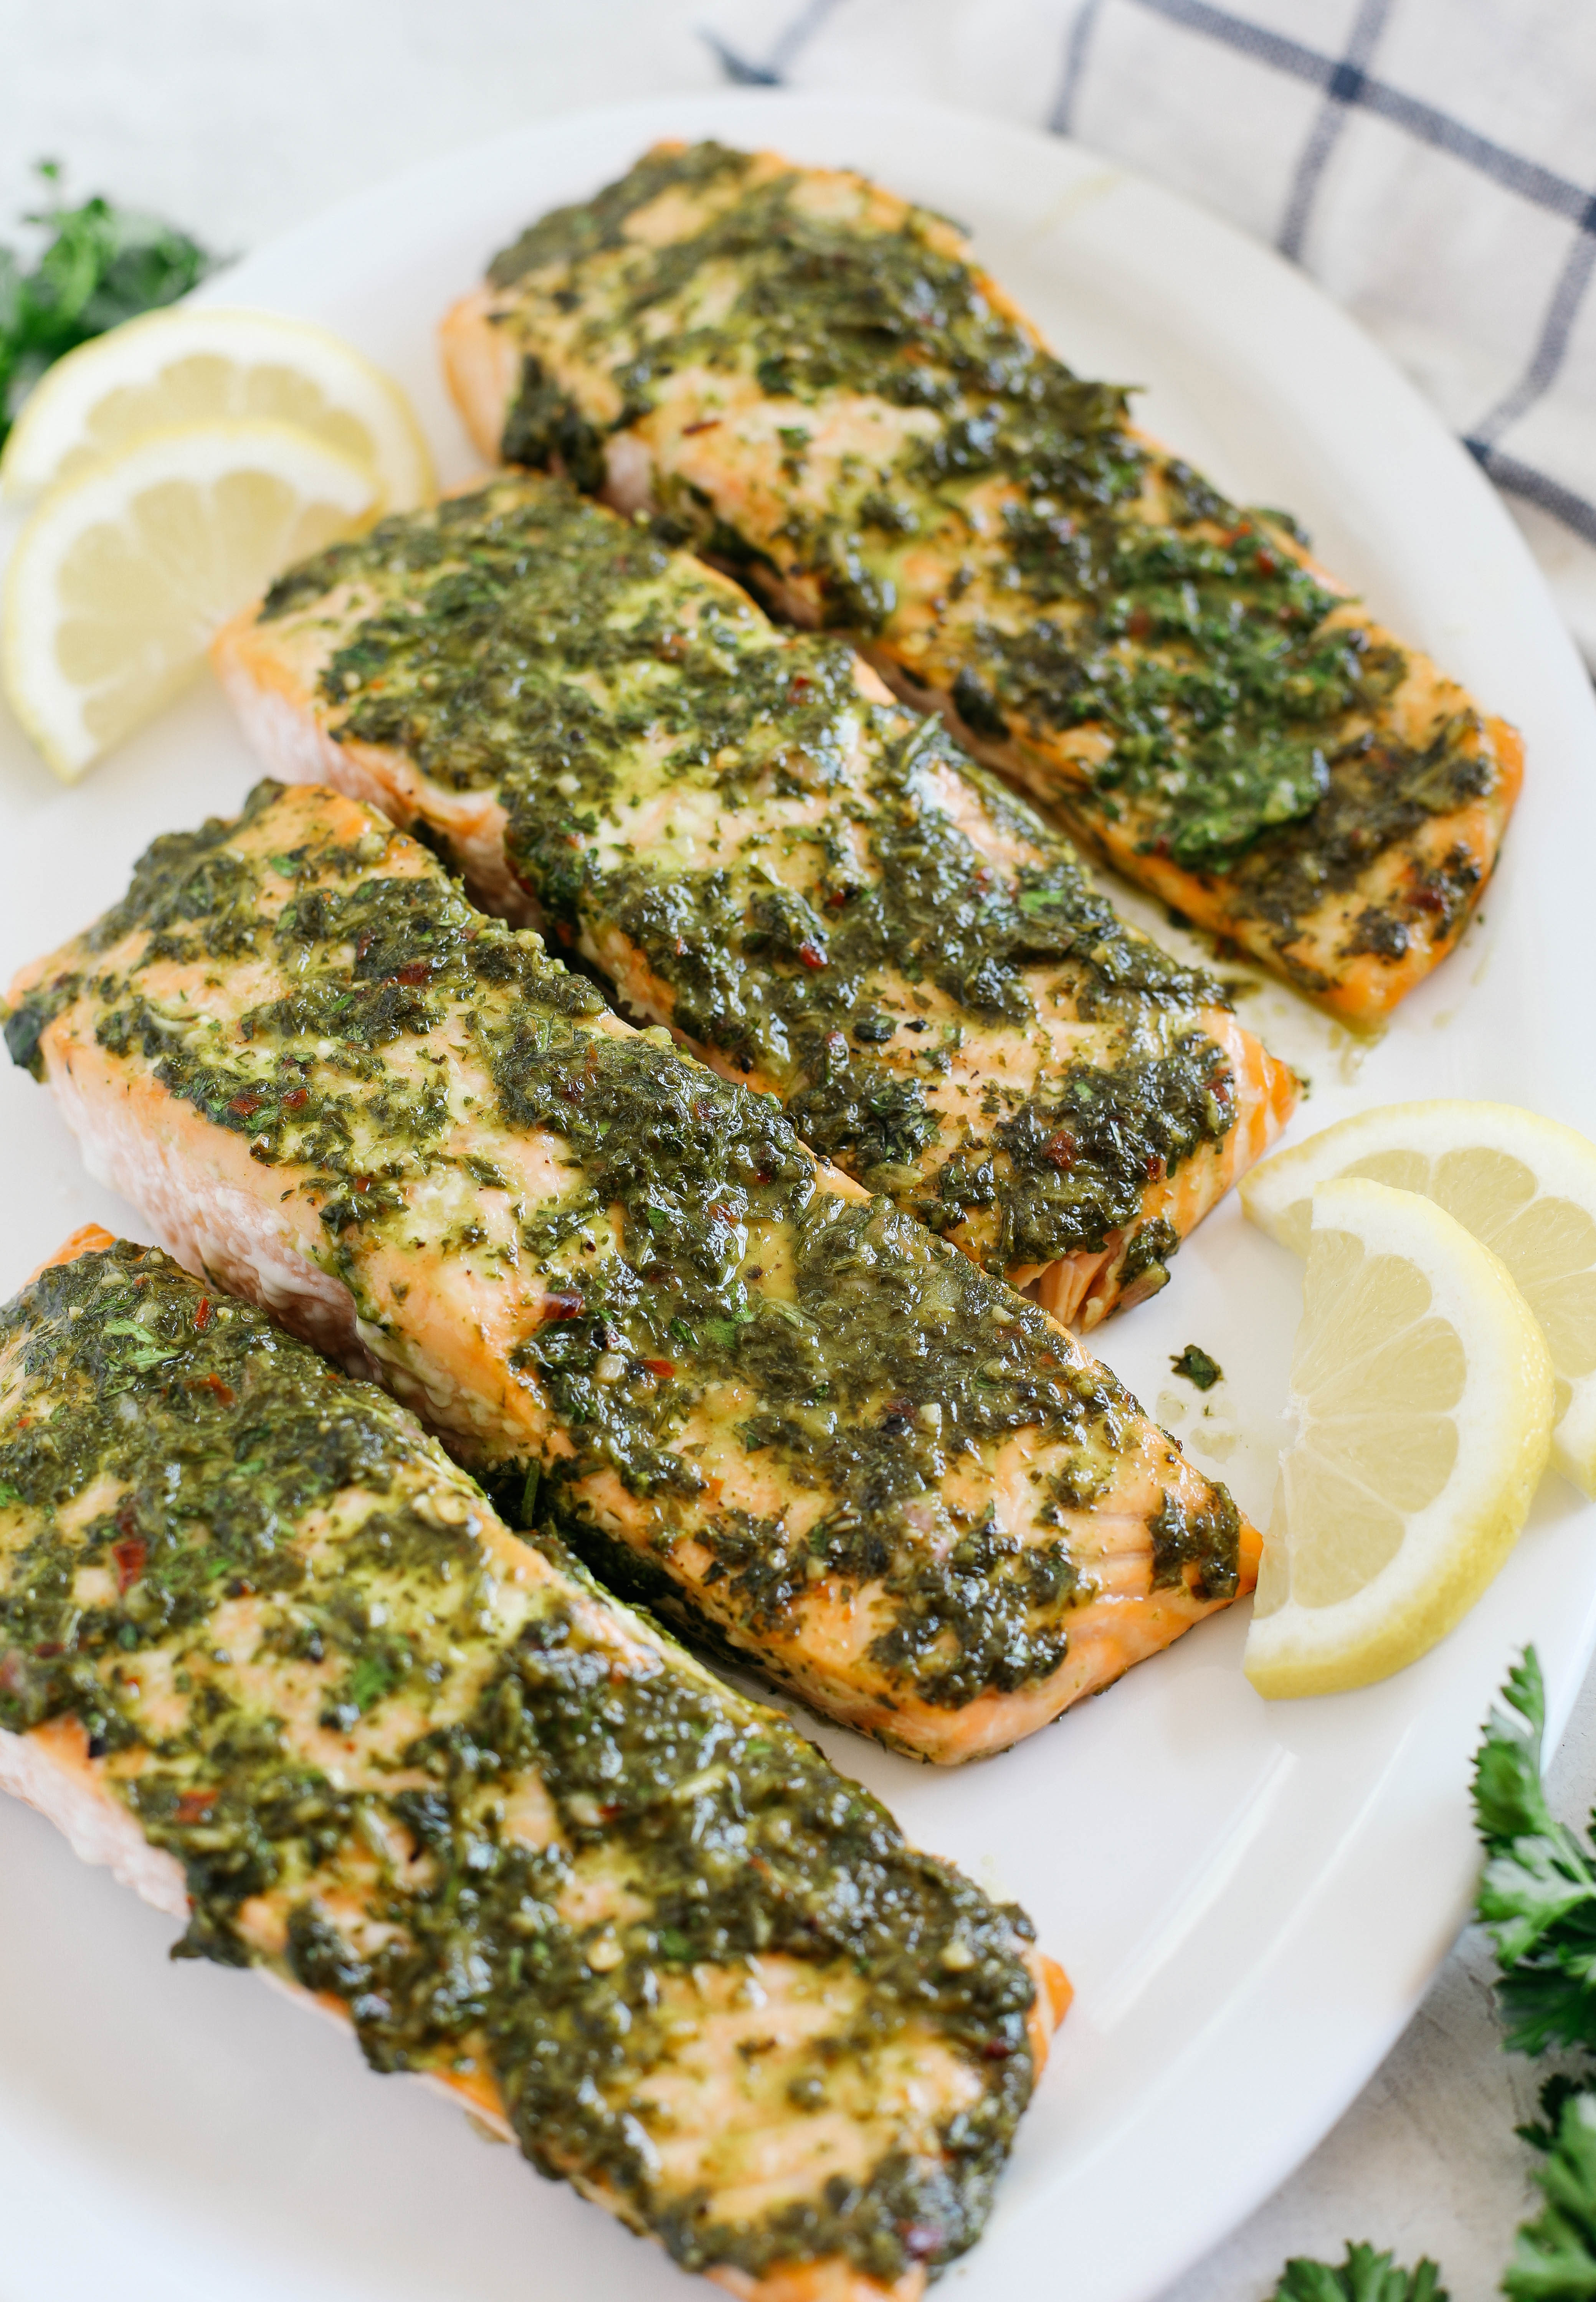 This deliciously EASY Chimichurri Baked Salmon makes the perfect weeknight dinner that’s healthy, easy to prepare, and ready in just 20 minutes!